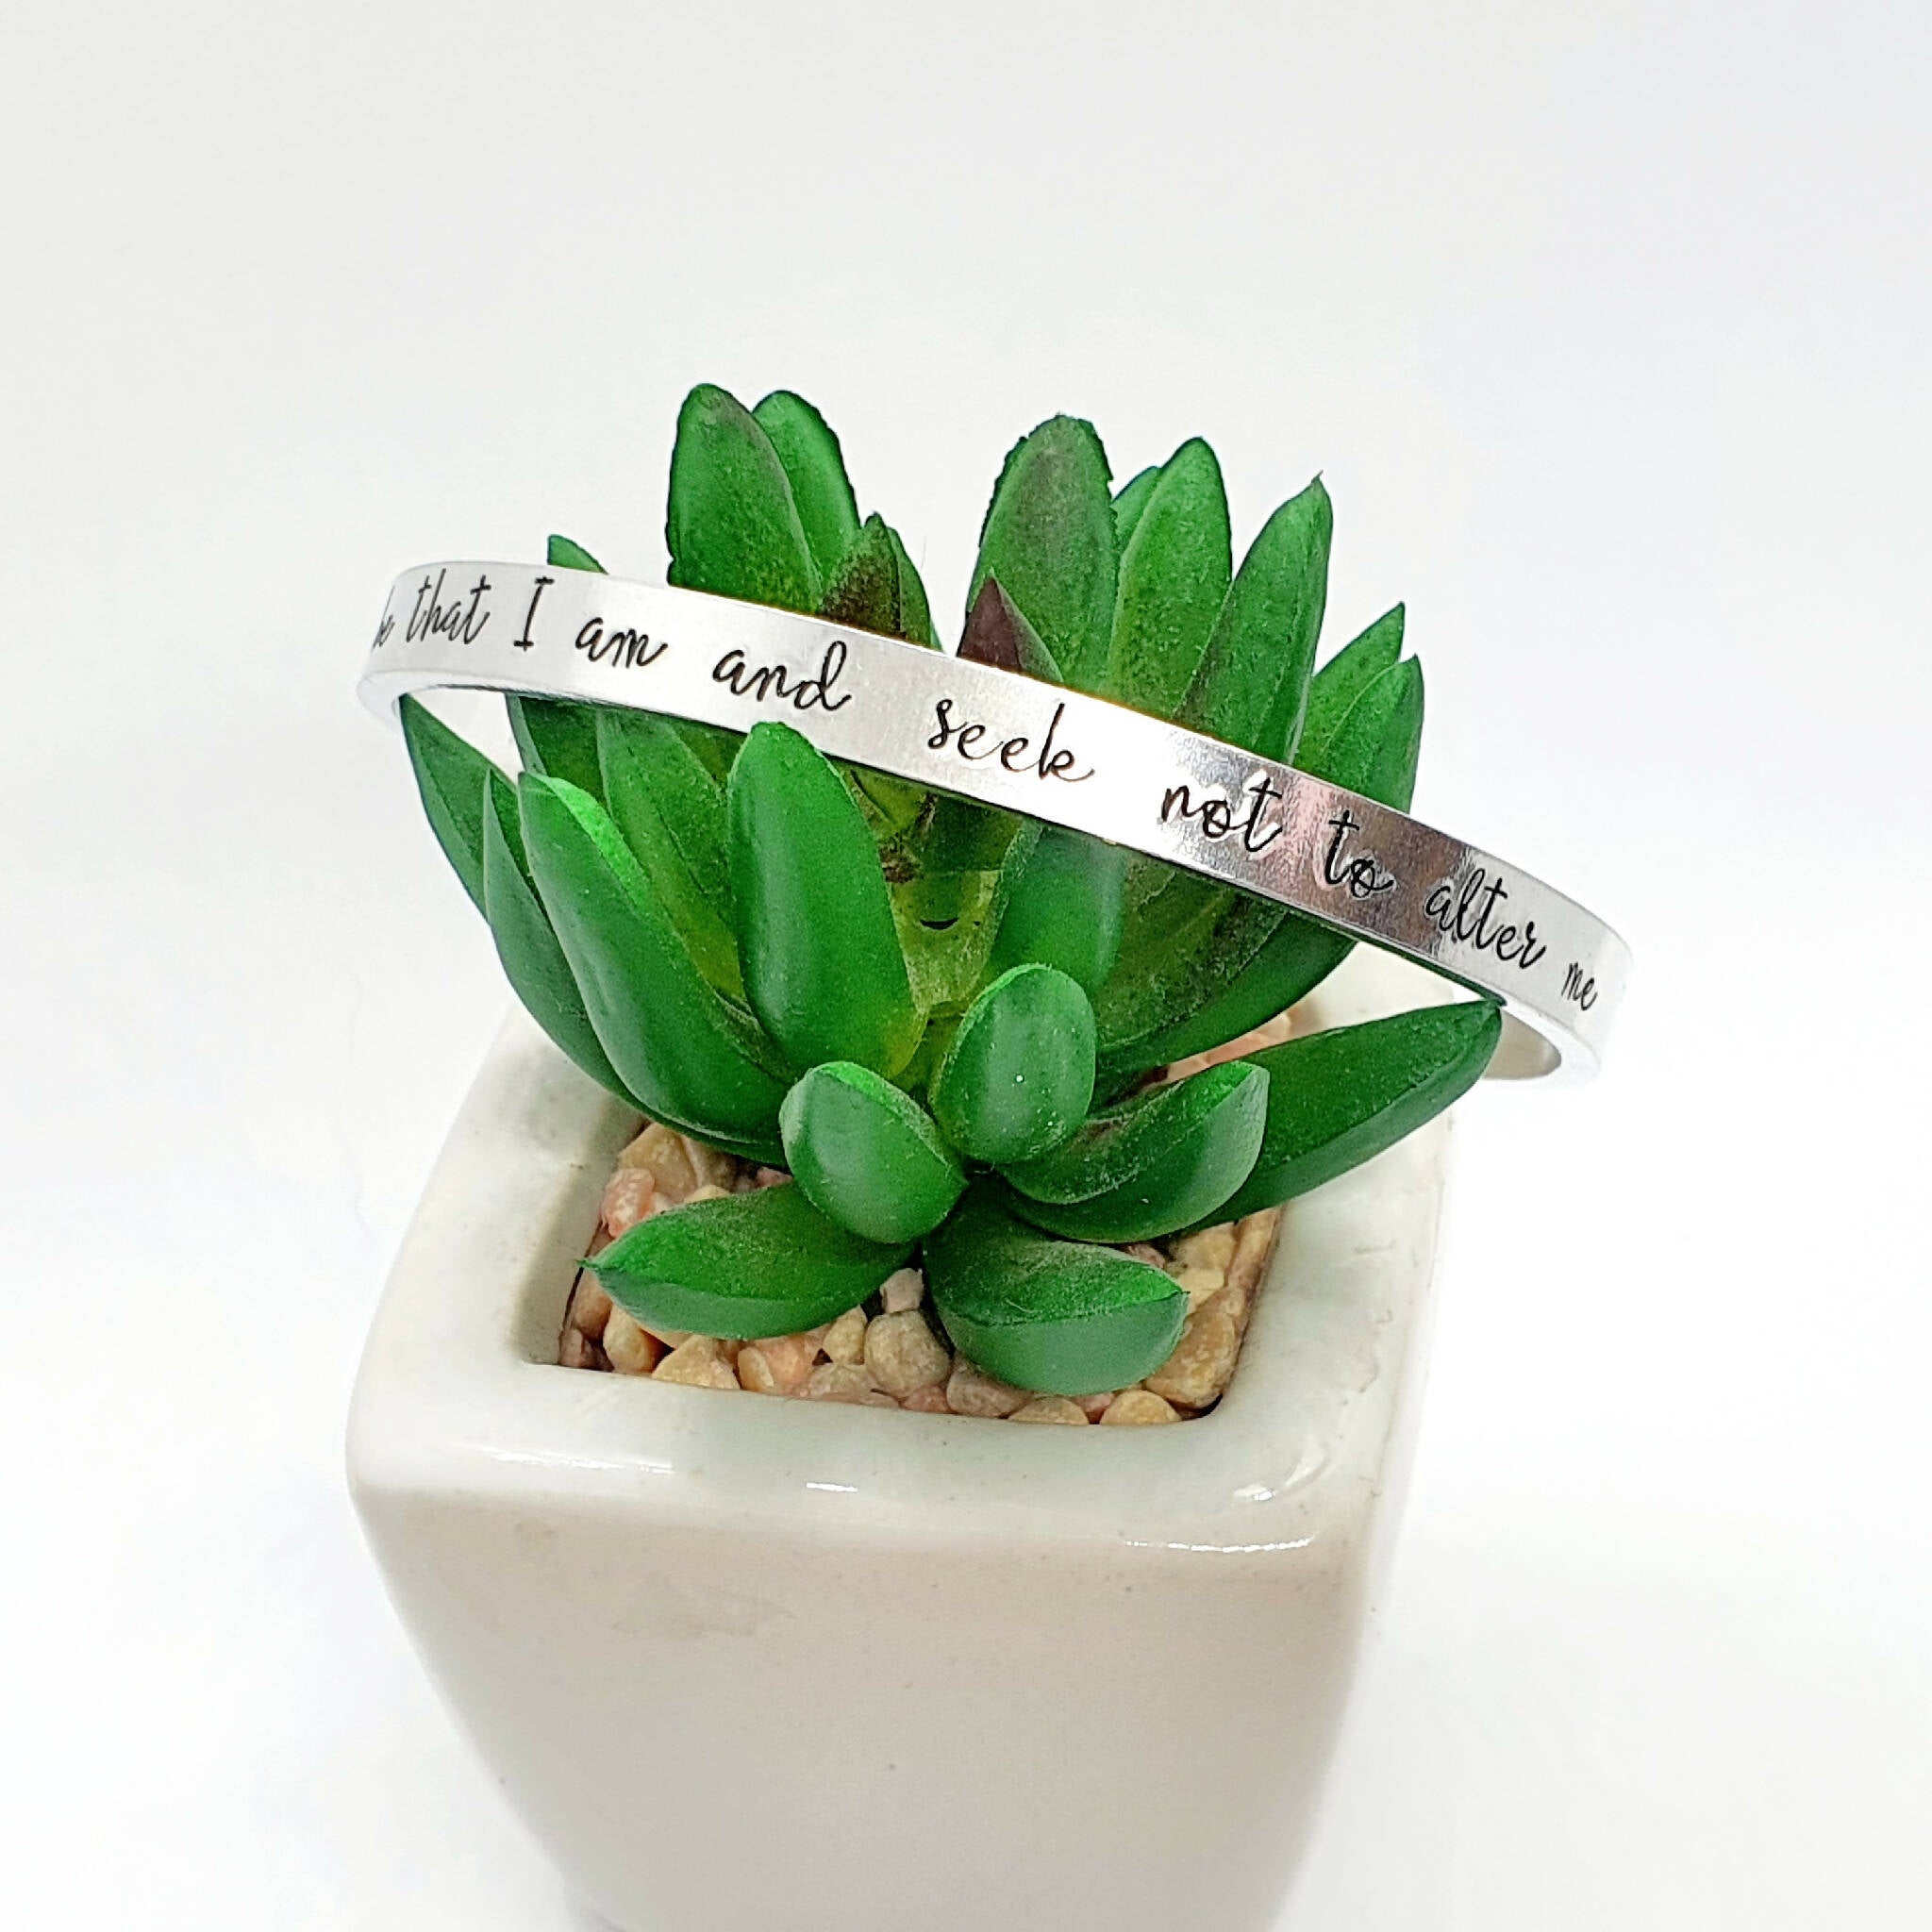 Much Ado About Nothing 'Let me be that I am and seek not to alter me' Aluminium William Shakespeare Quote Cuff